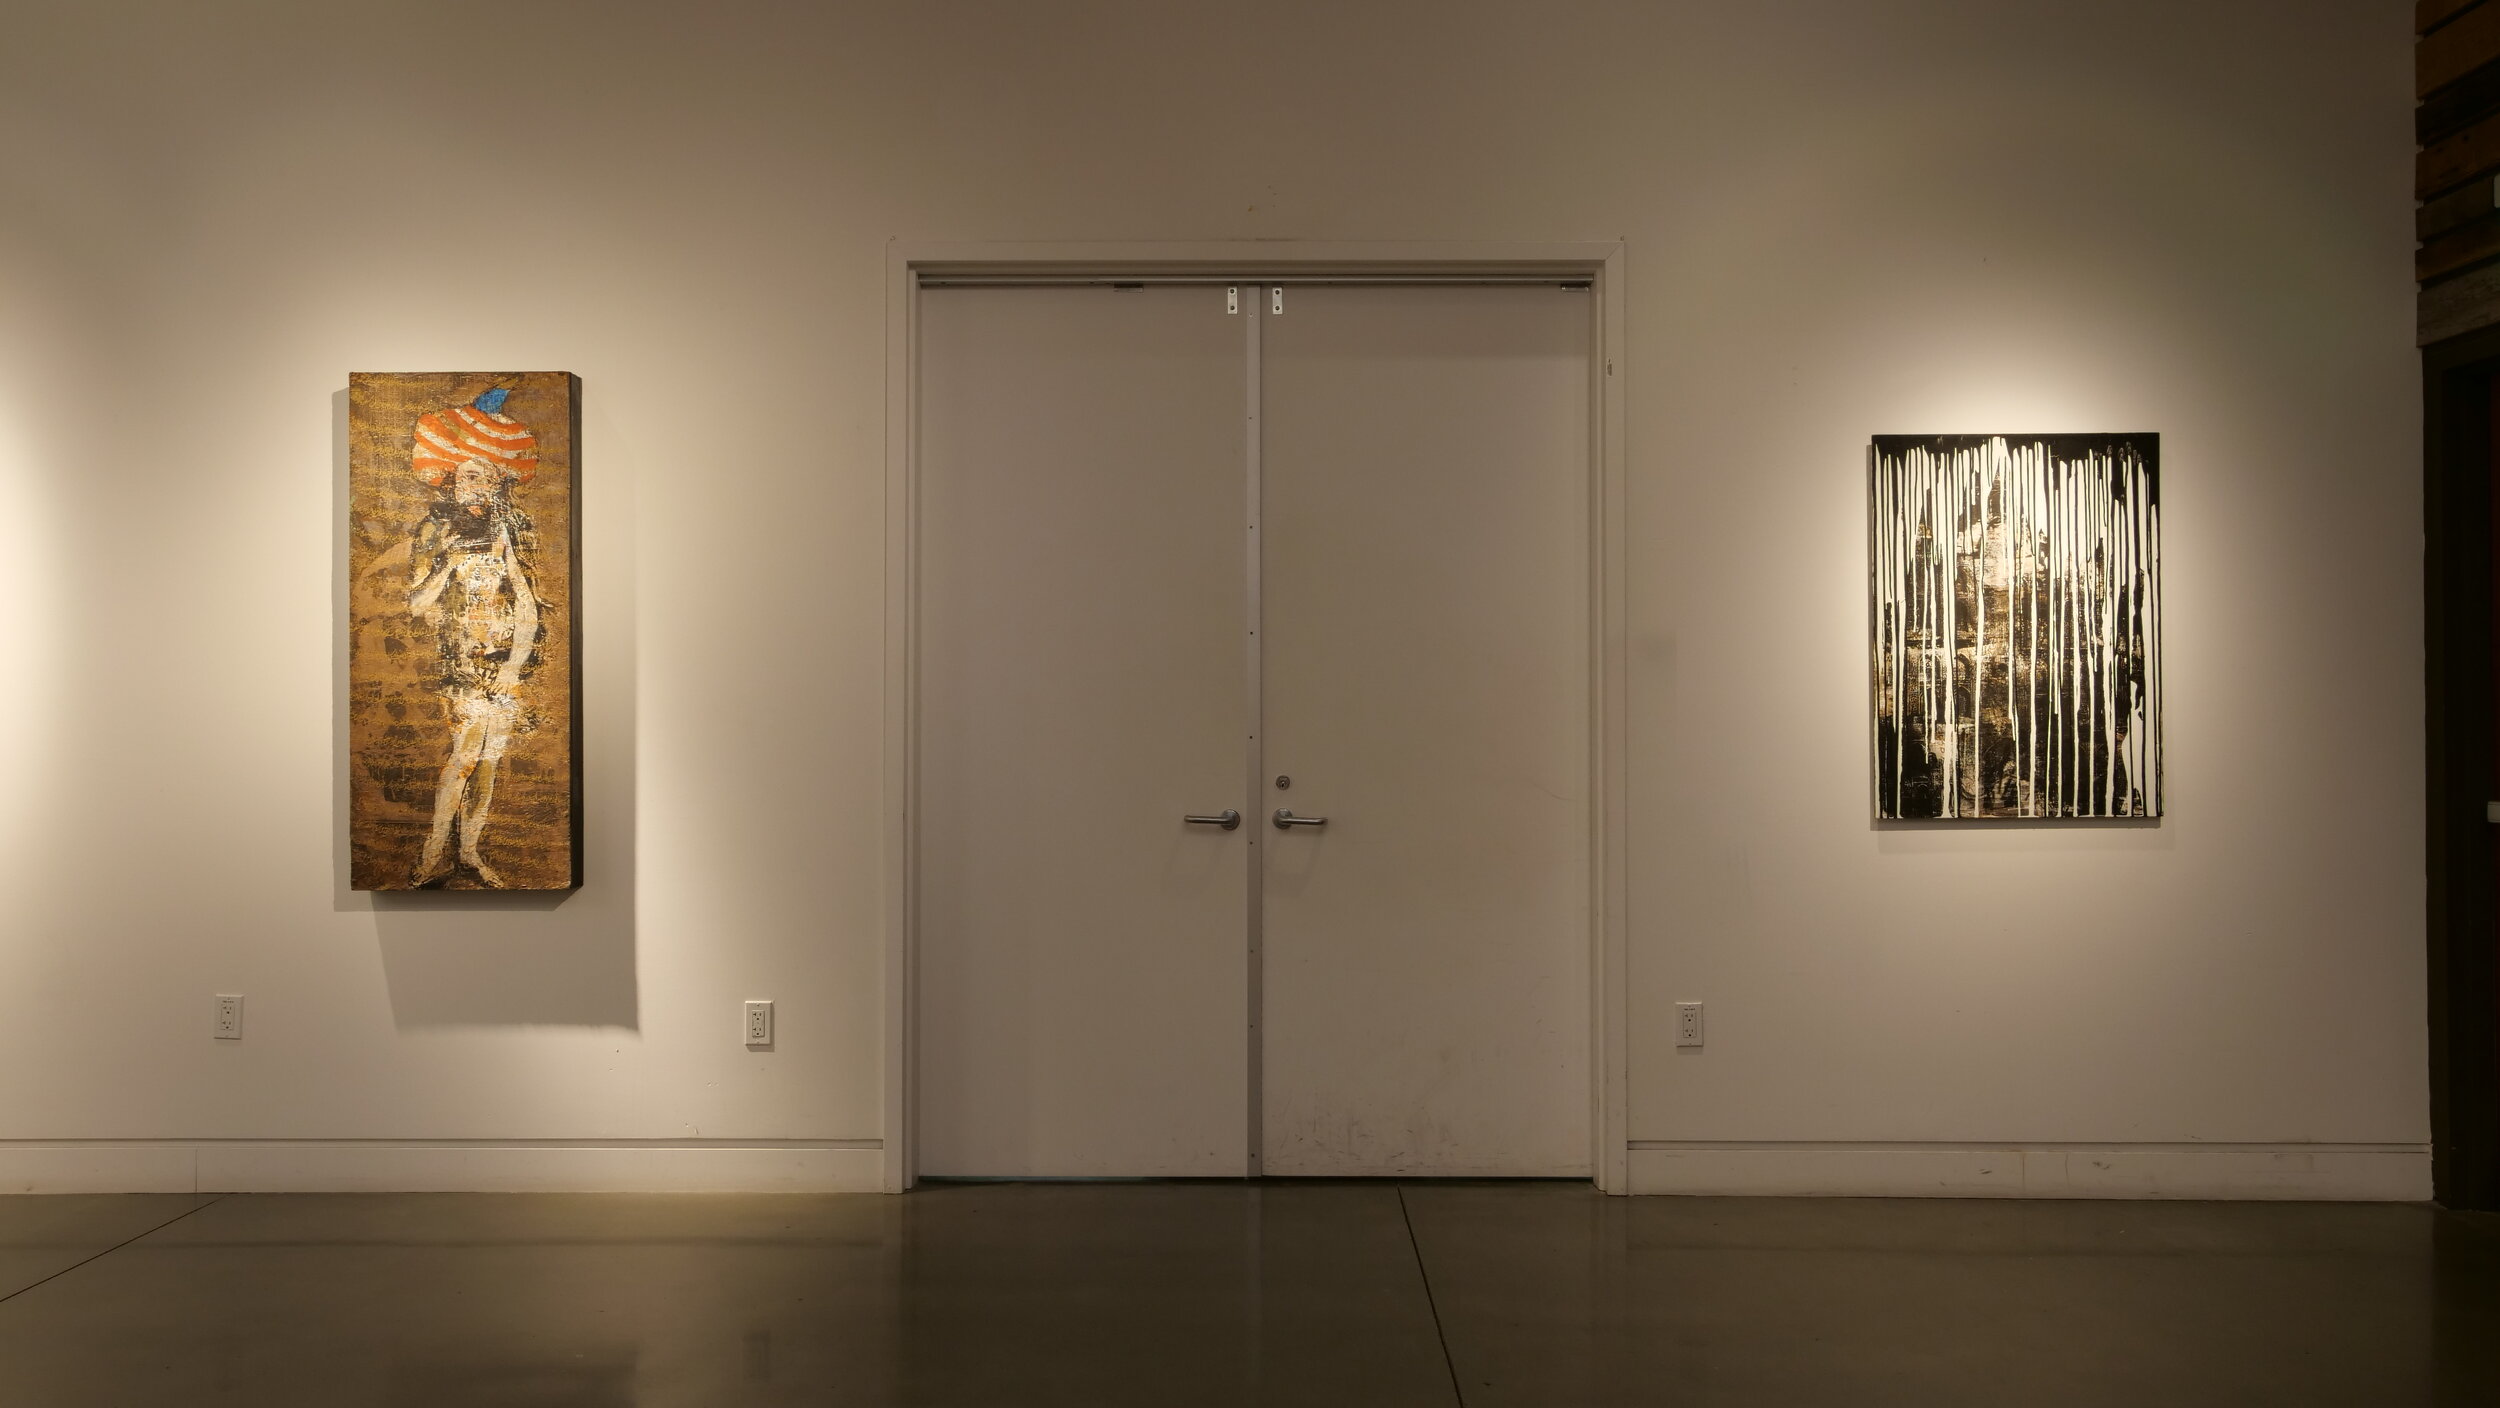 Moderately sized, warm-tone paintings hang on either side of double doors.